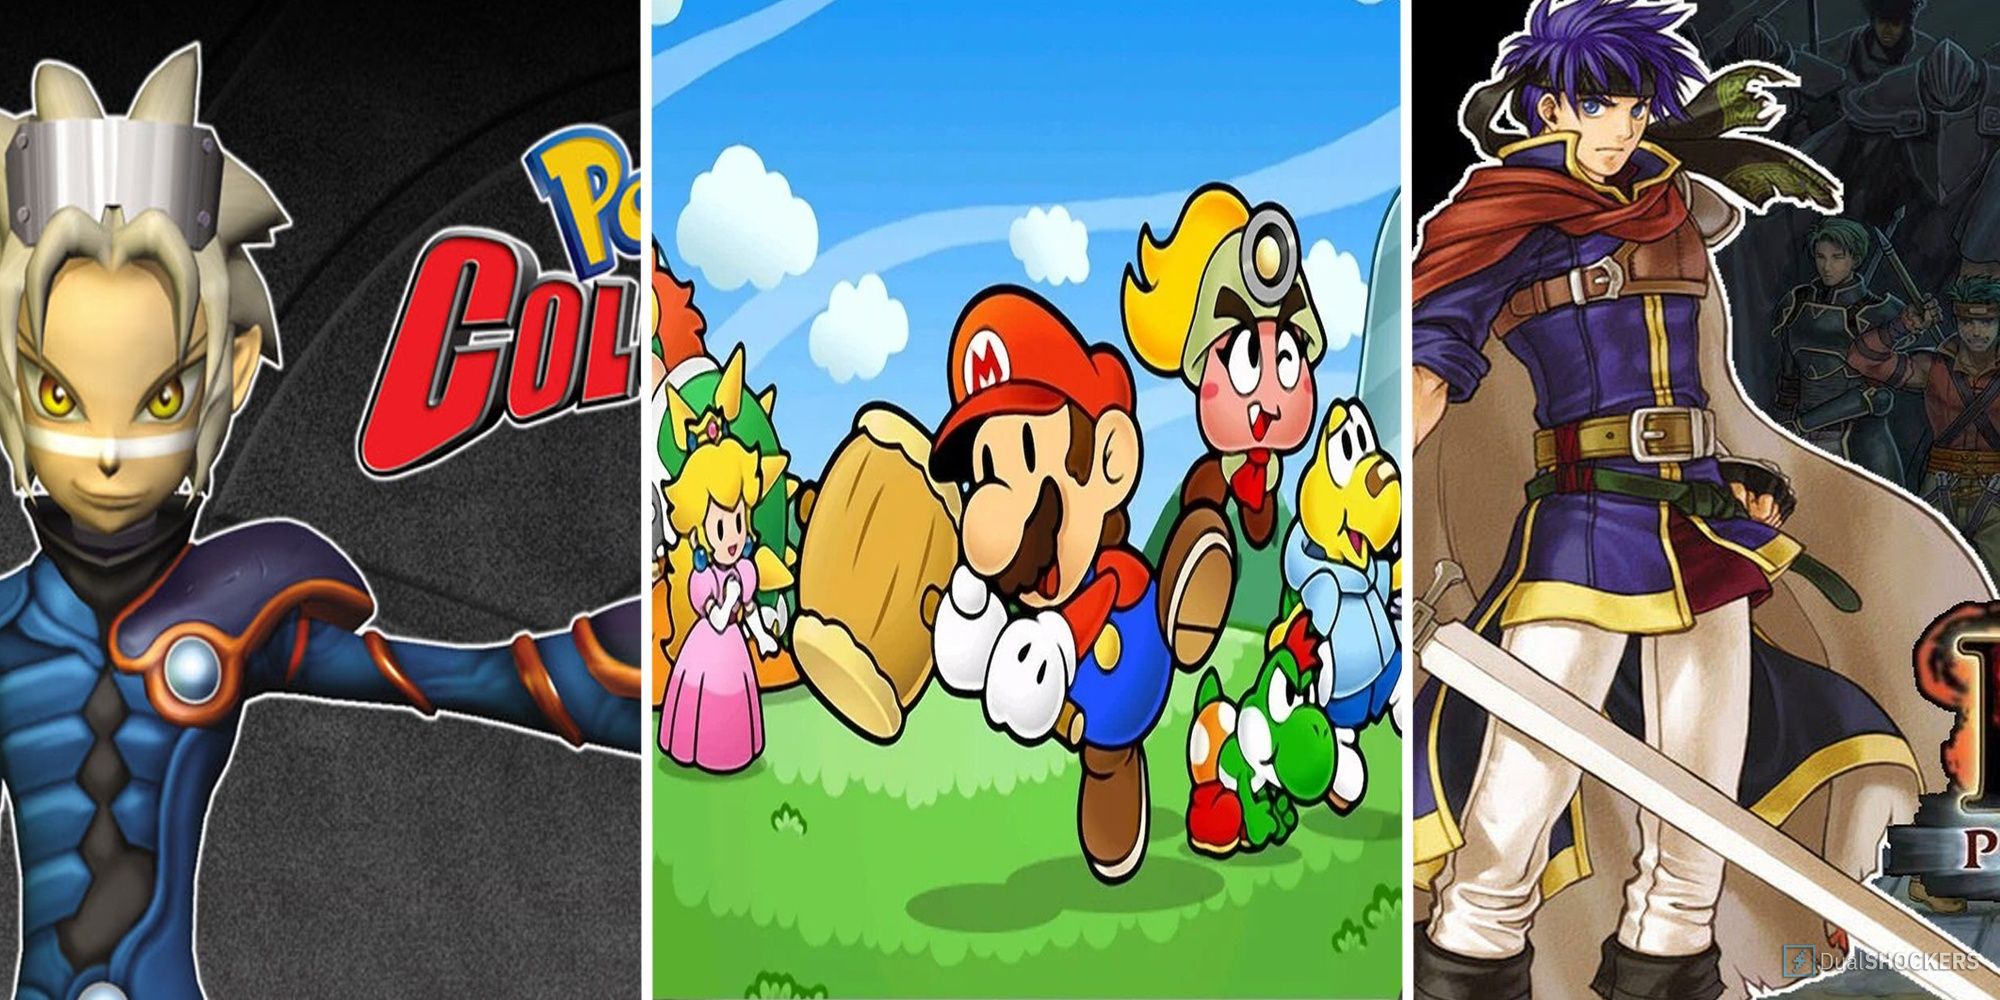 The Main Heroes From Pokemon Colosseum, Paper Mario The Thousdand-Year Door And Fire Emblem Path Of Radiance